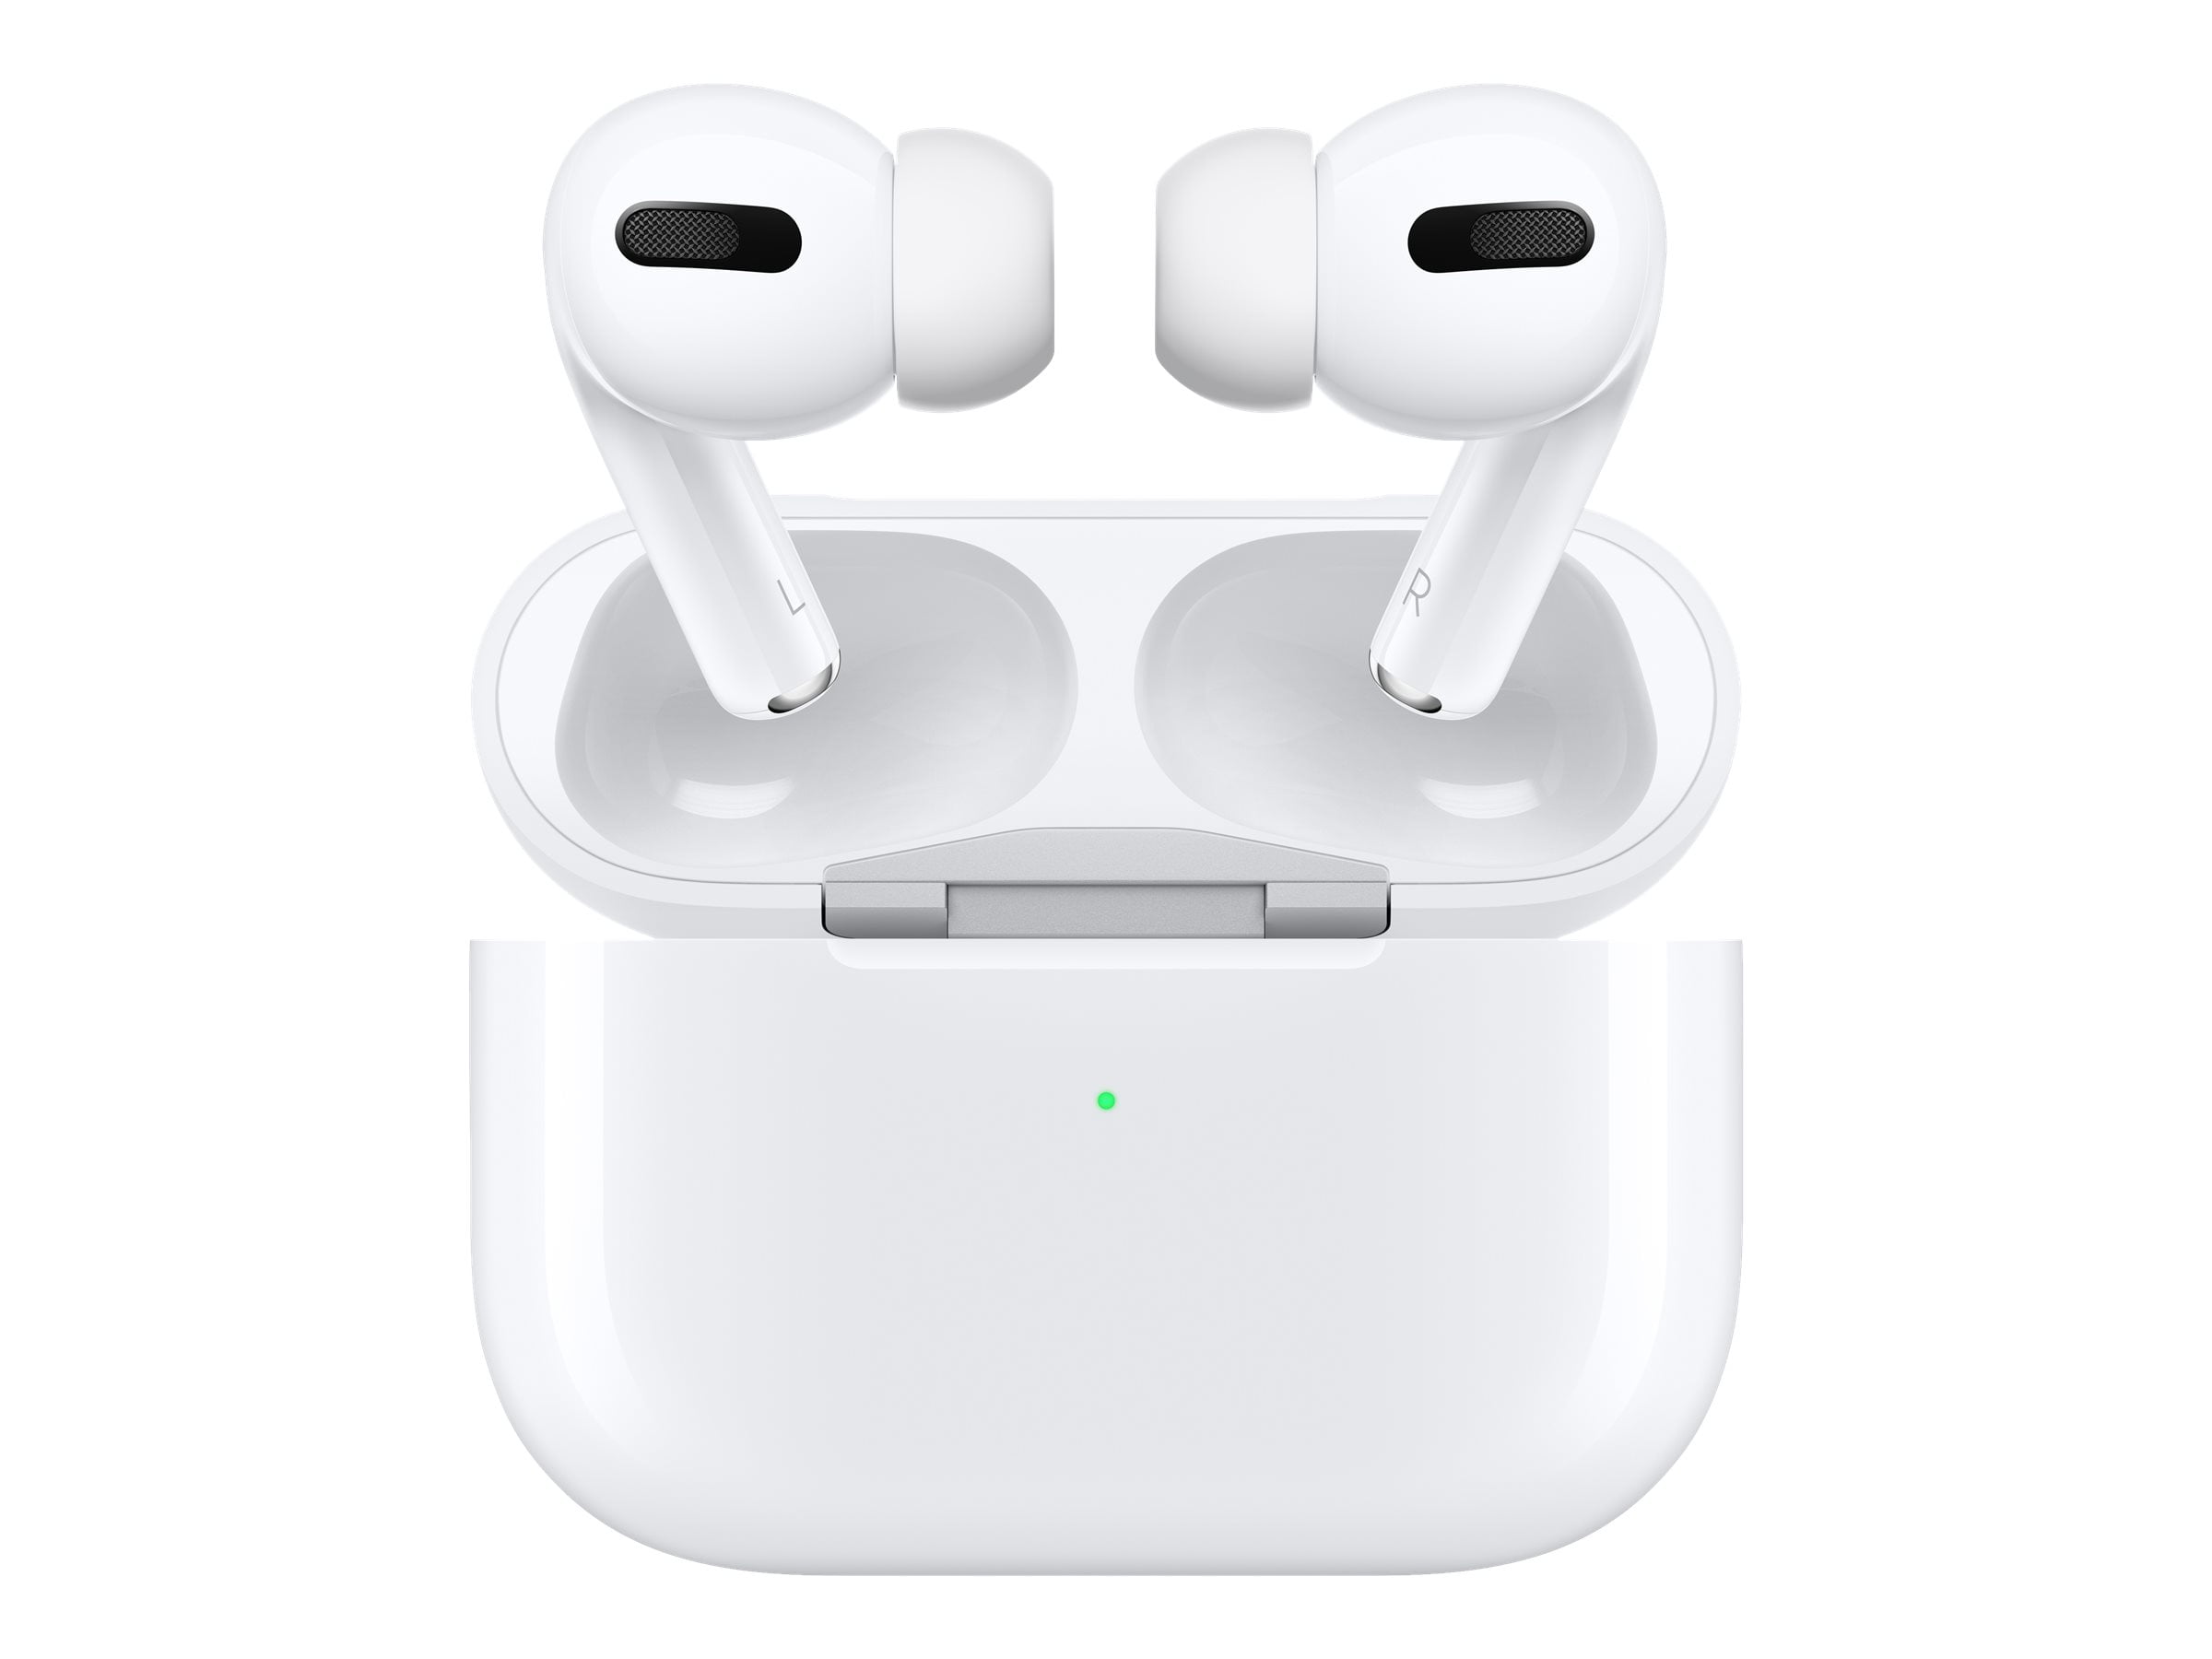 Apple AirPods Pro - True wireless with mic - in-ear - Bluetooth - active noise canceling - for iPad/iPhone/iPod/TV/Watch - Walmart.com